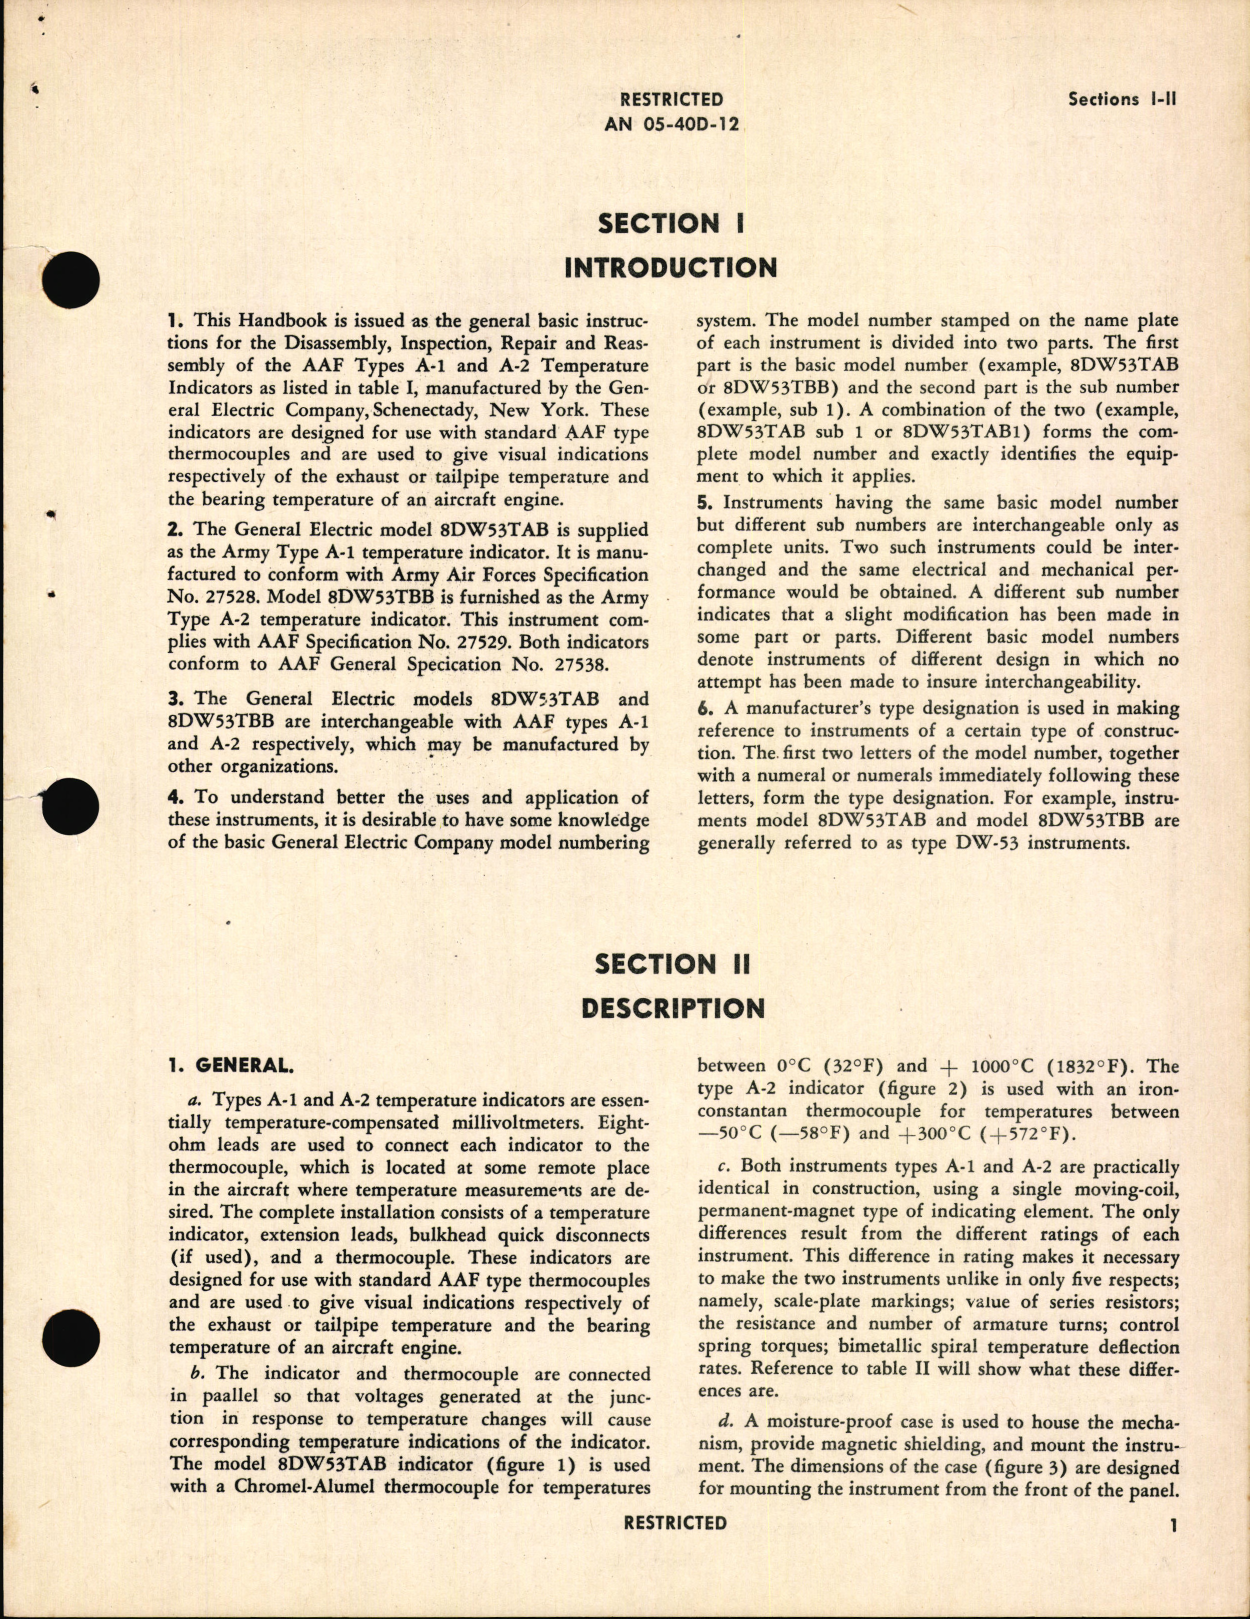 Sample page 7 from AirCorps Library document: Overhaul Instructions with Parts Catalog for Temperature Indicators Types A-1 and A-2